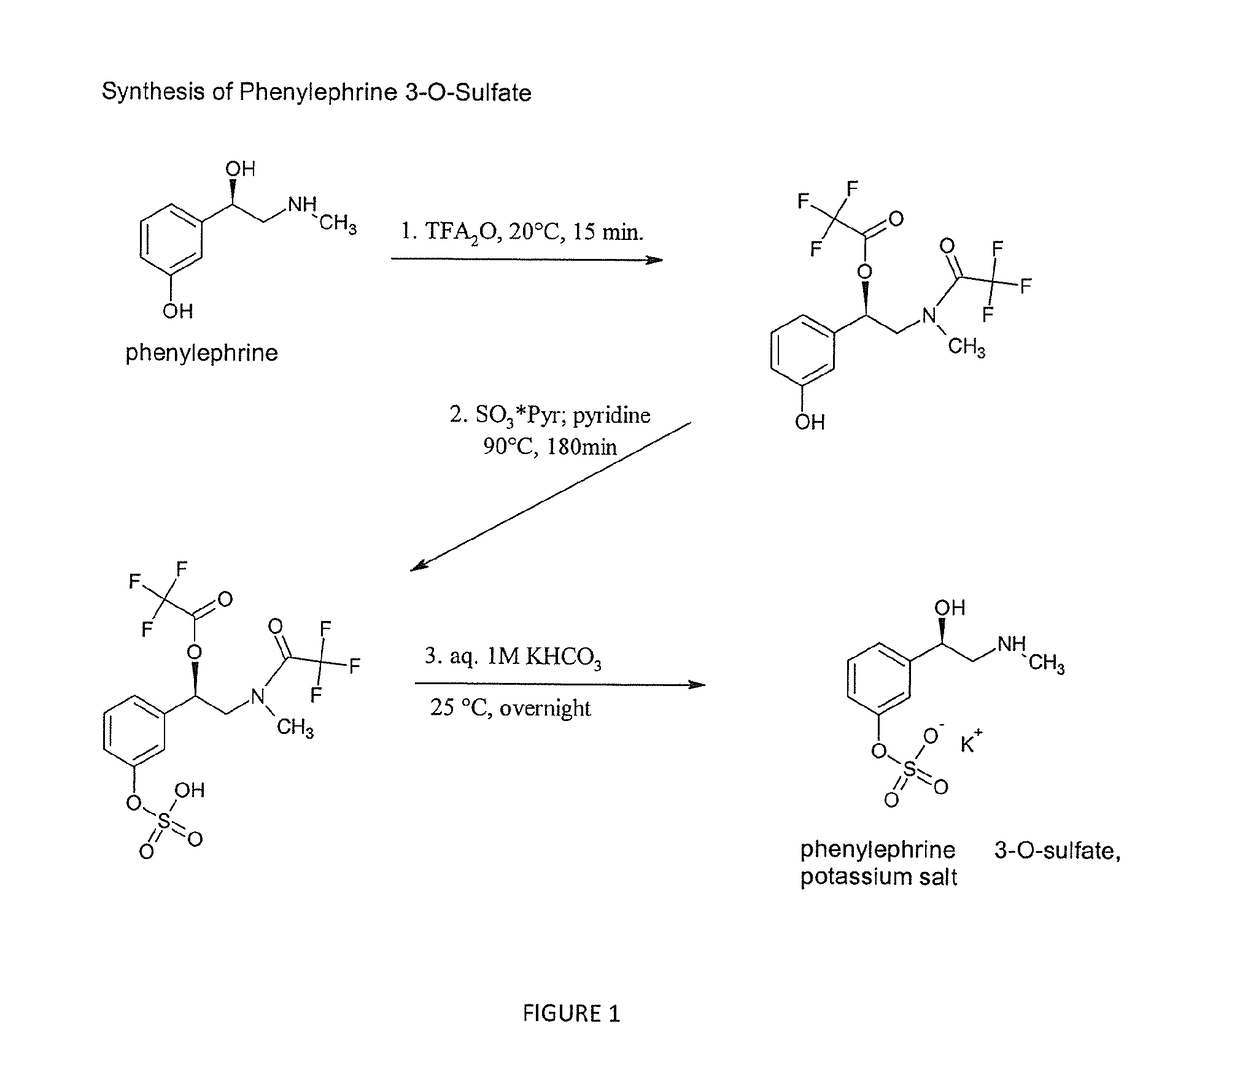 Selective metabolic approach to increasing oral bioavailability of phenylephrine and other phenolic bioactivities